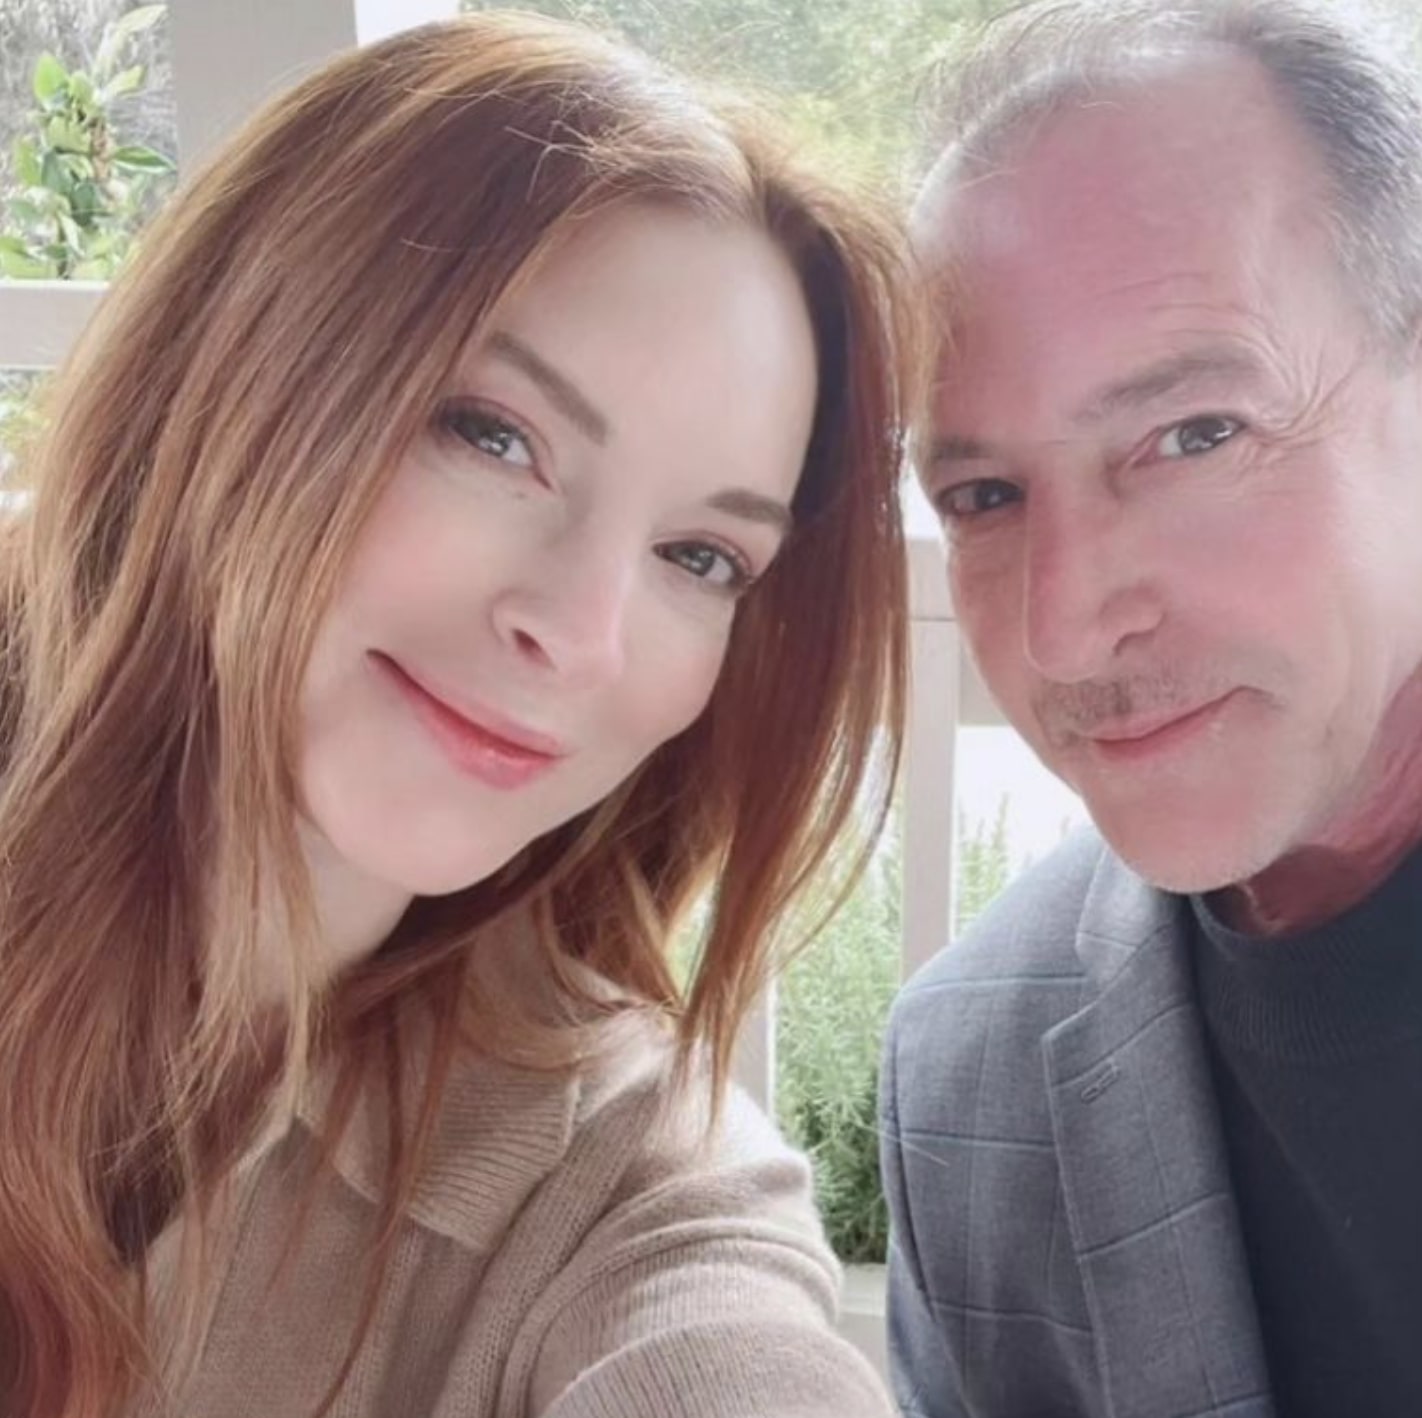 lindsay-lohan’s-father-michael-had-an-aggressive-skin-cancer-removed-from-his-hand